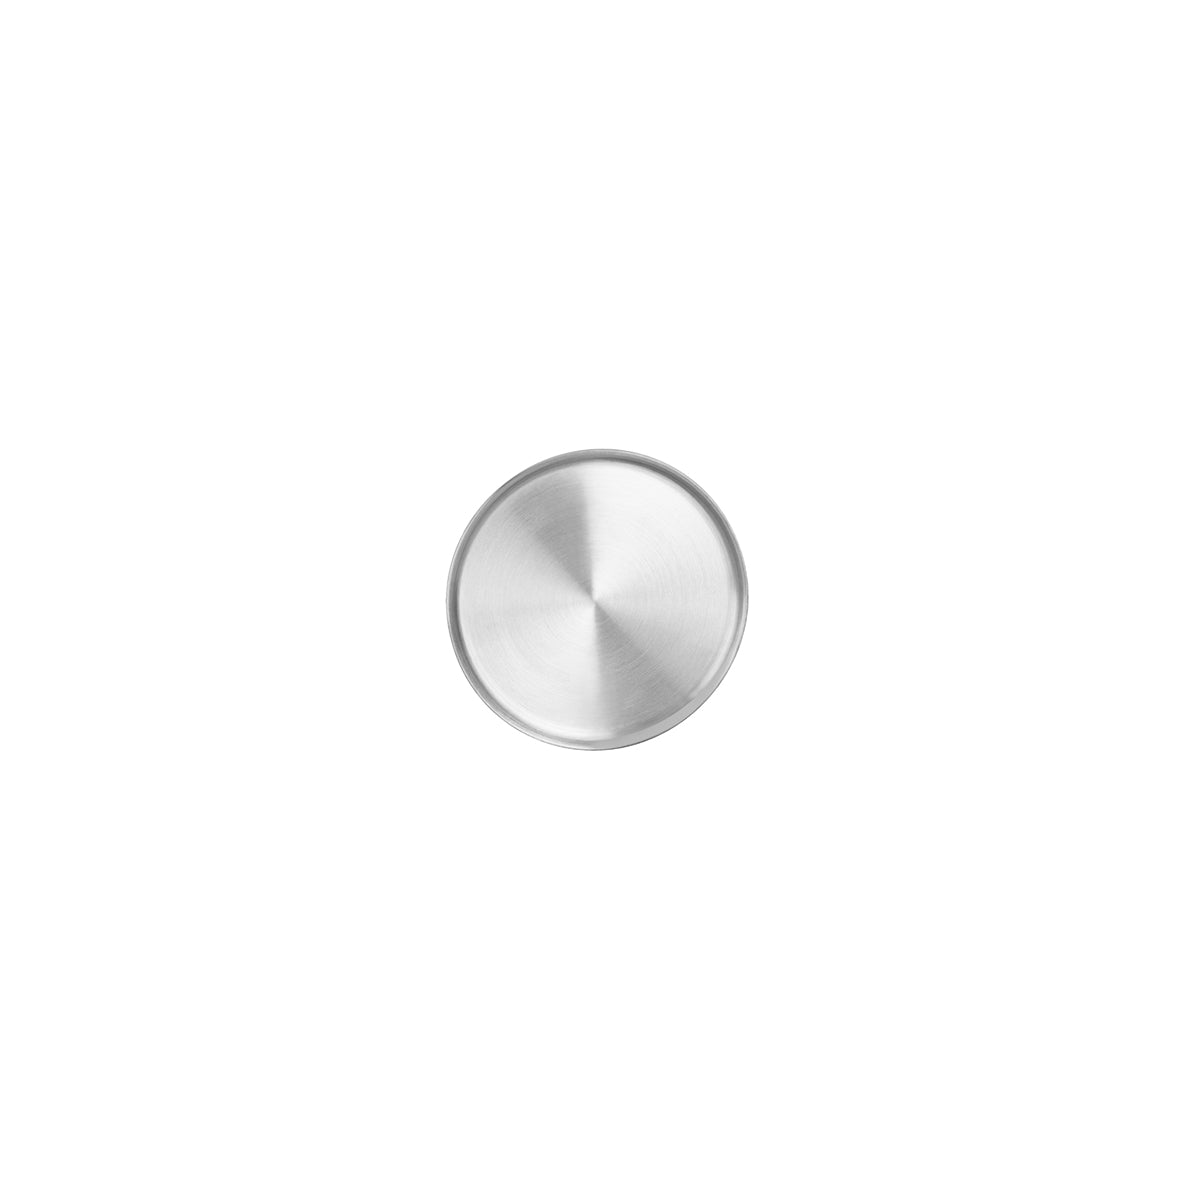 76515 Chef Inox Change / Service Tray Round Stainless Steel 150mm Tomkin Australia Hospitality Supplies